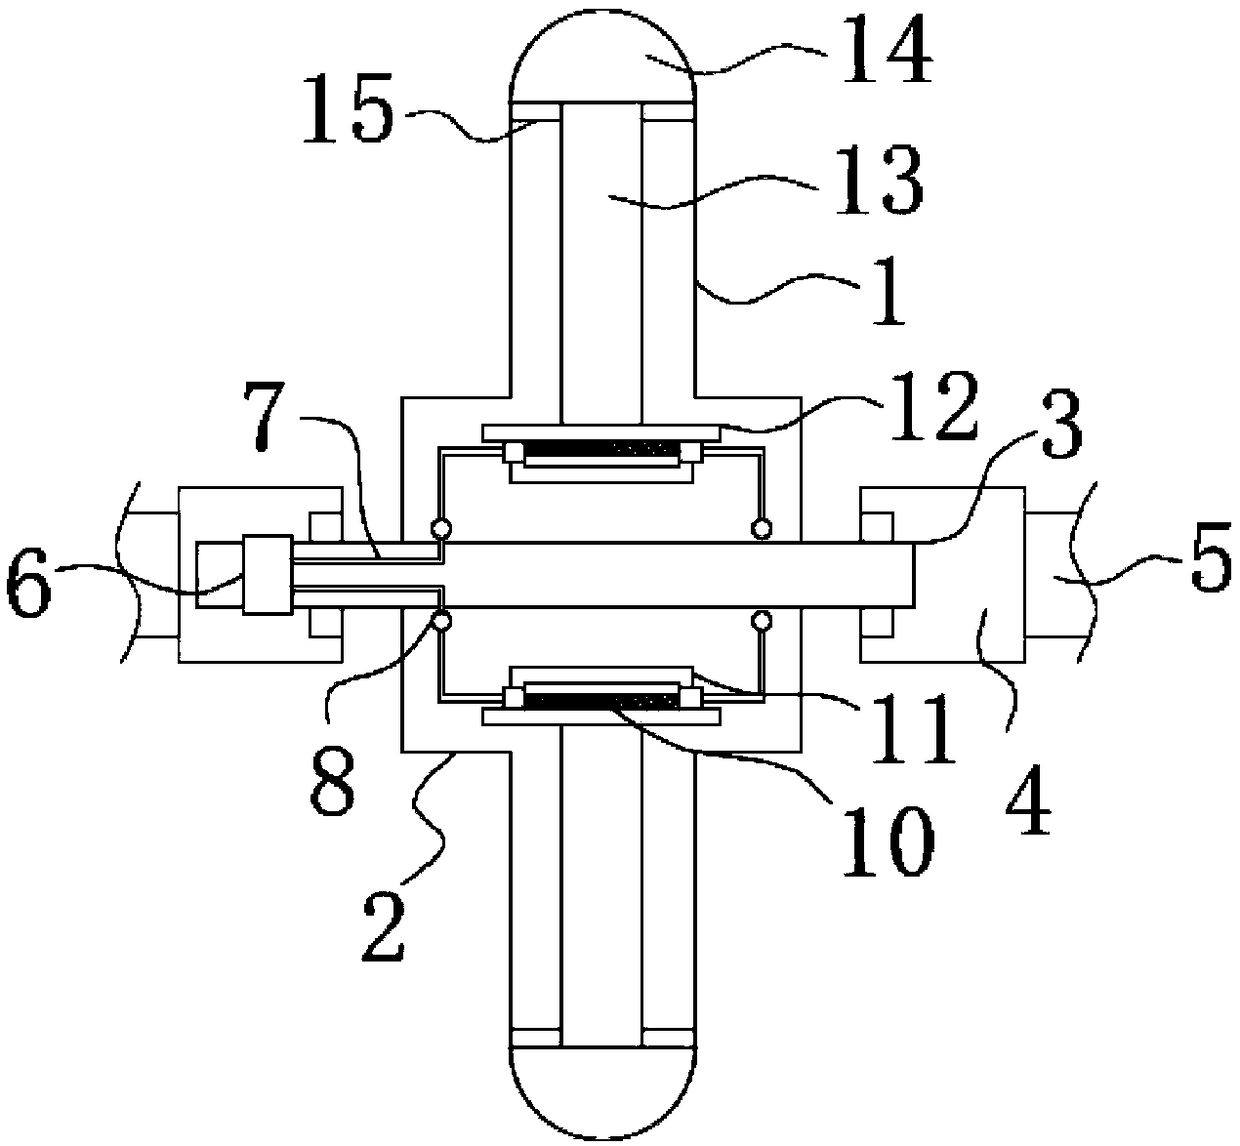 Flanging device for flanging machine